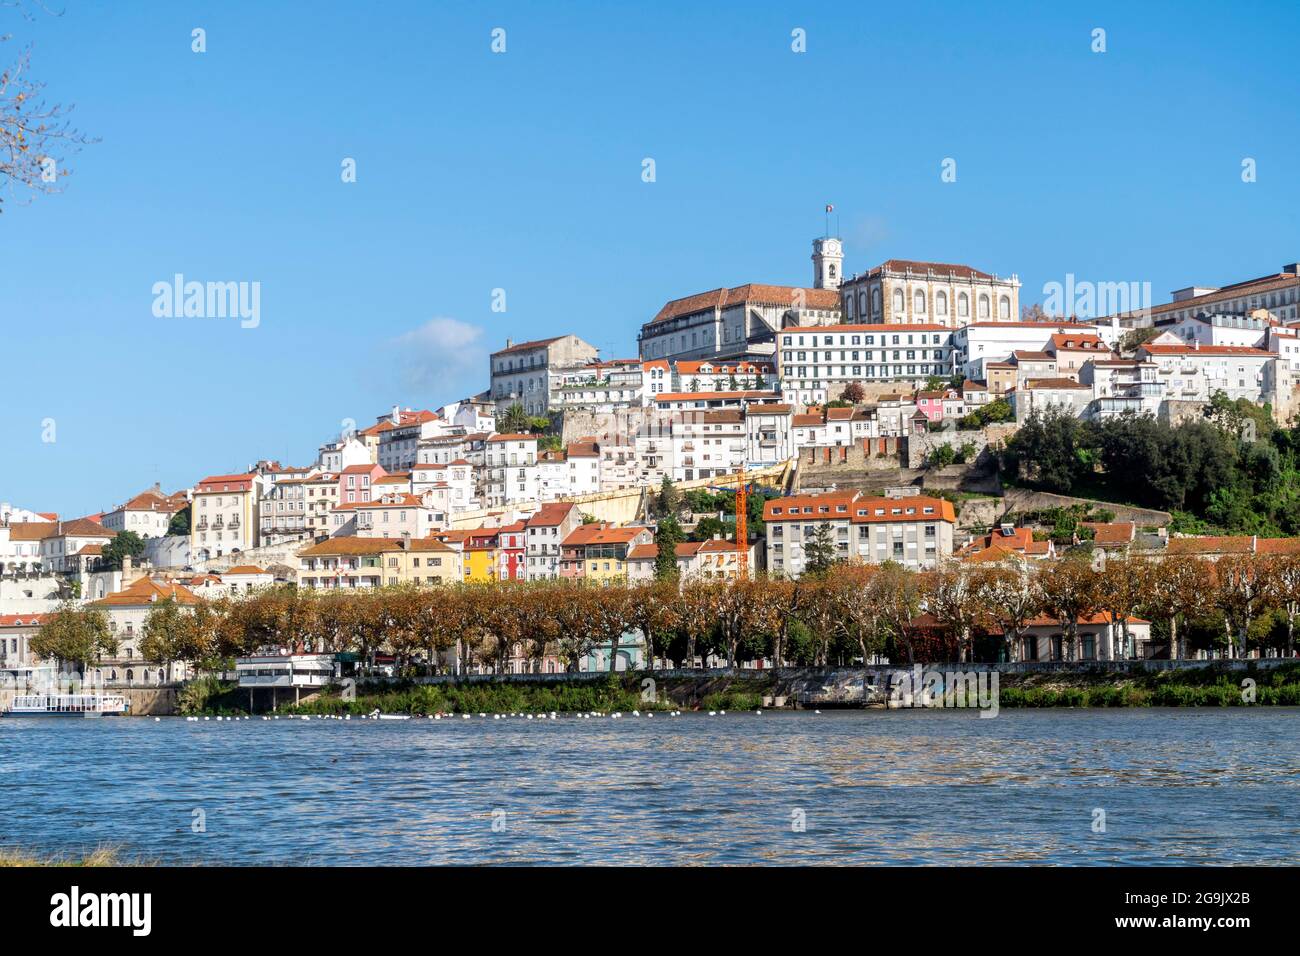 Beautiful old town of Coimbra located on the hill by Mondego river, Portugal Stock Photo